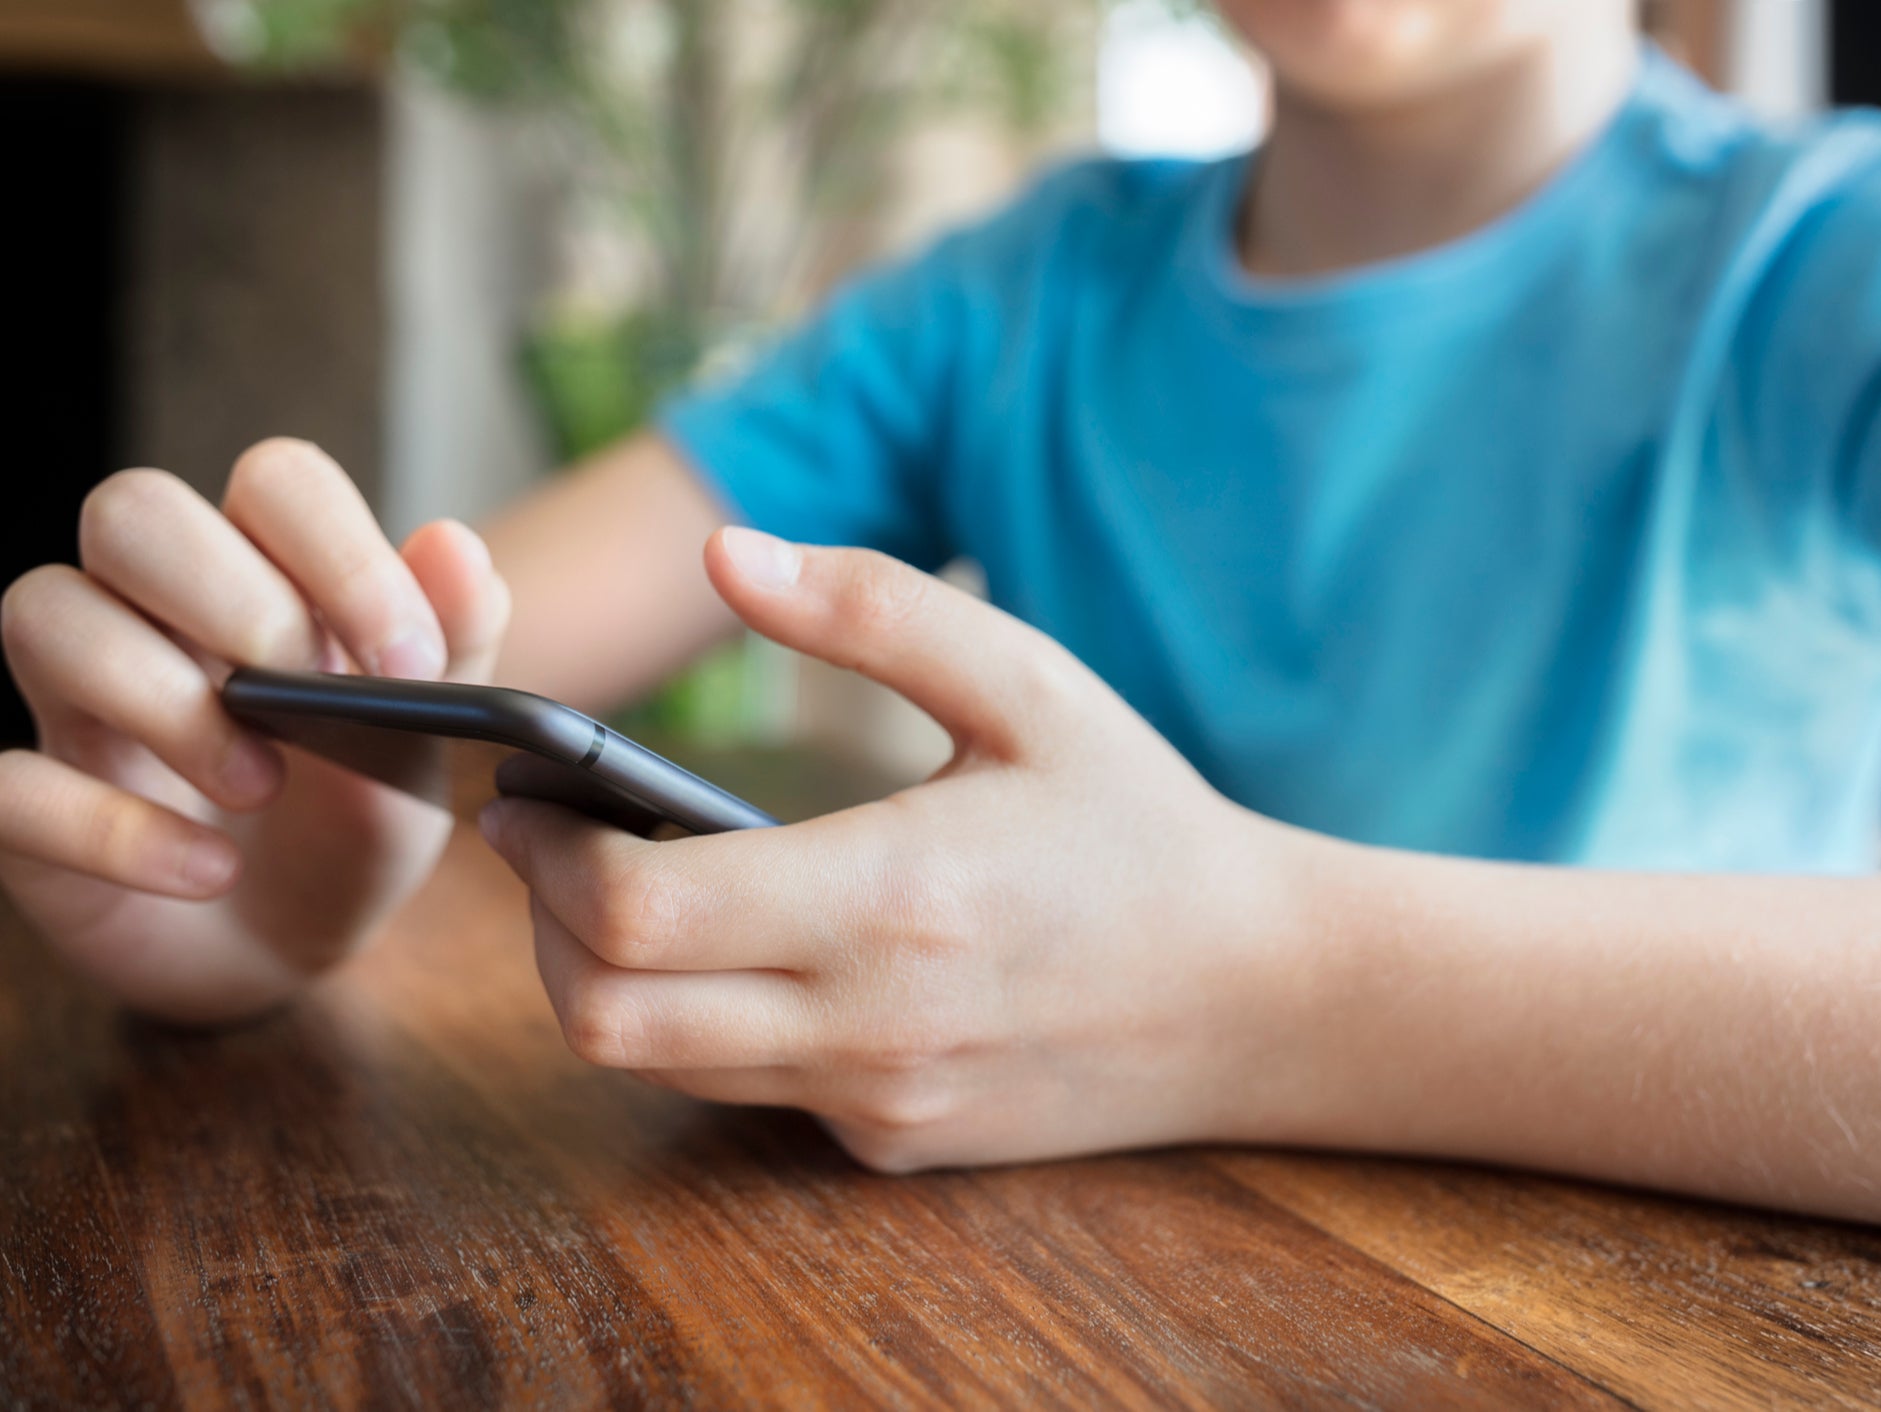 A young boy uses a smartphone